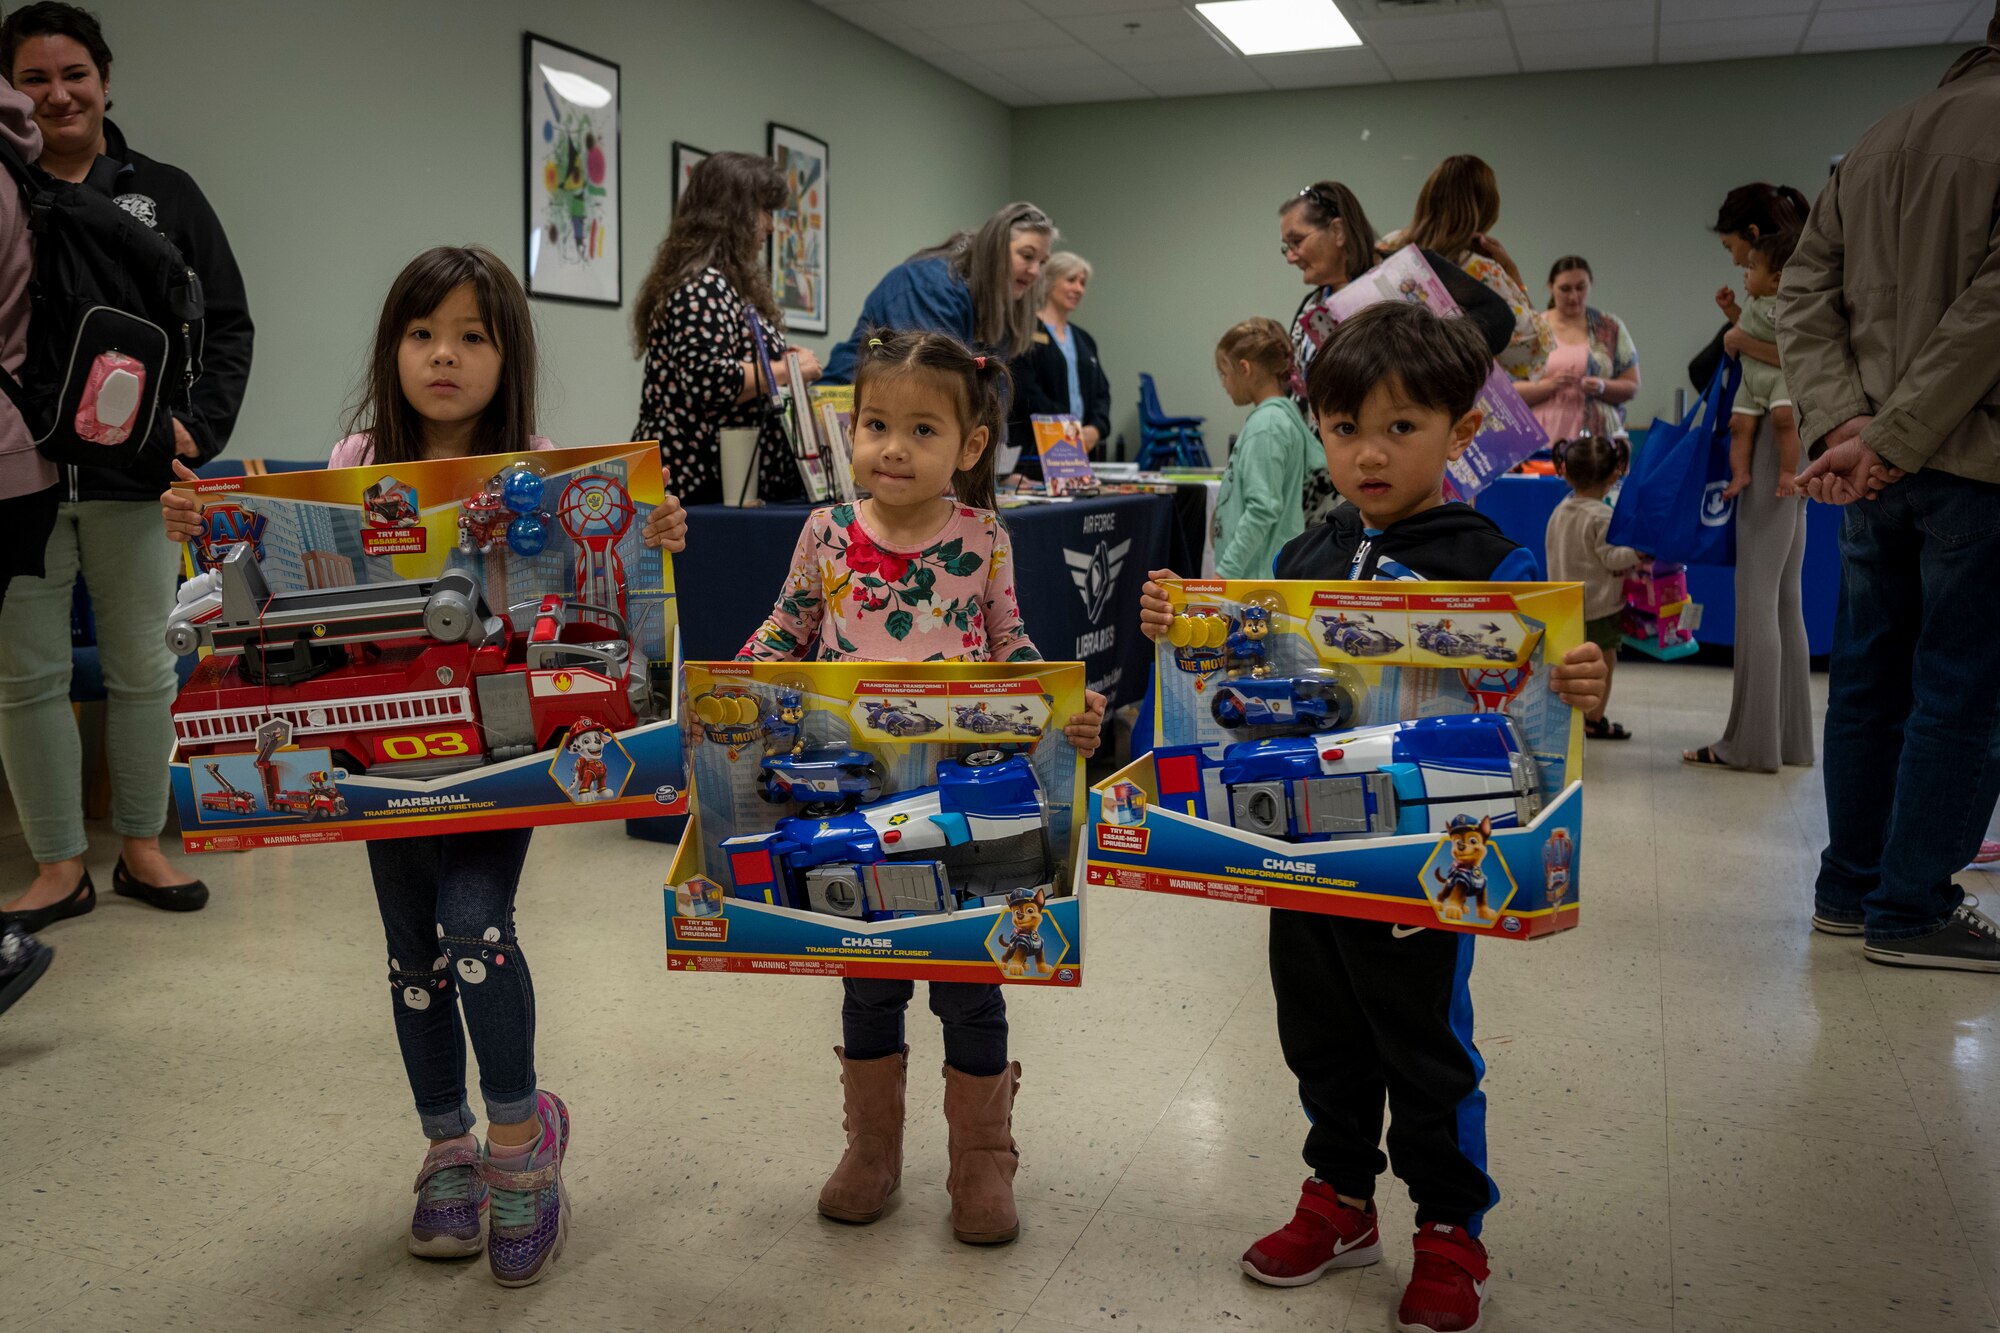 Children of 4th Fighter Wing Airmen show off toys during the Discovery Center Ribbon Cutting Ceremony at Seymour Johnson Air Force Base, North Carolina, March 23, 2023. The North Carolina USO donated toys for children to take after the ceremony.